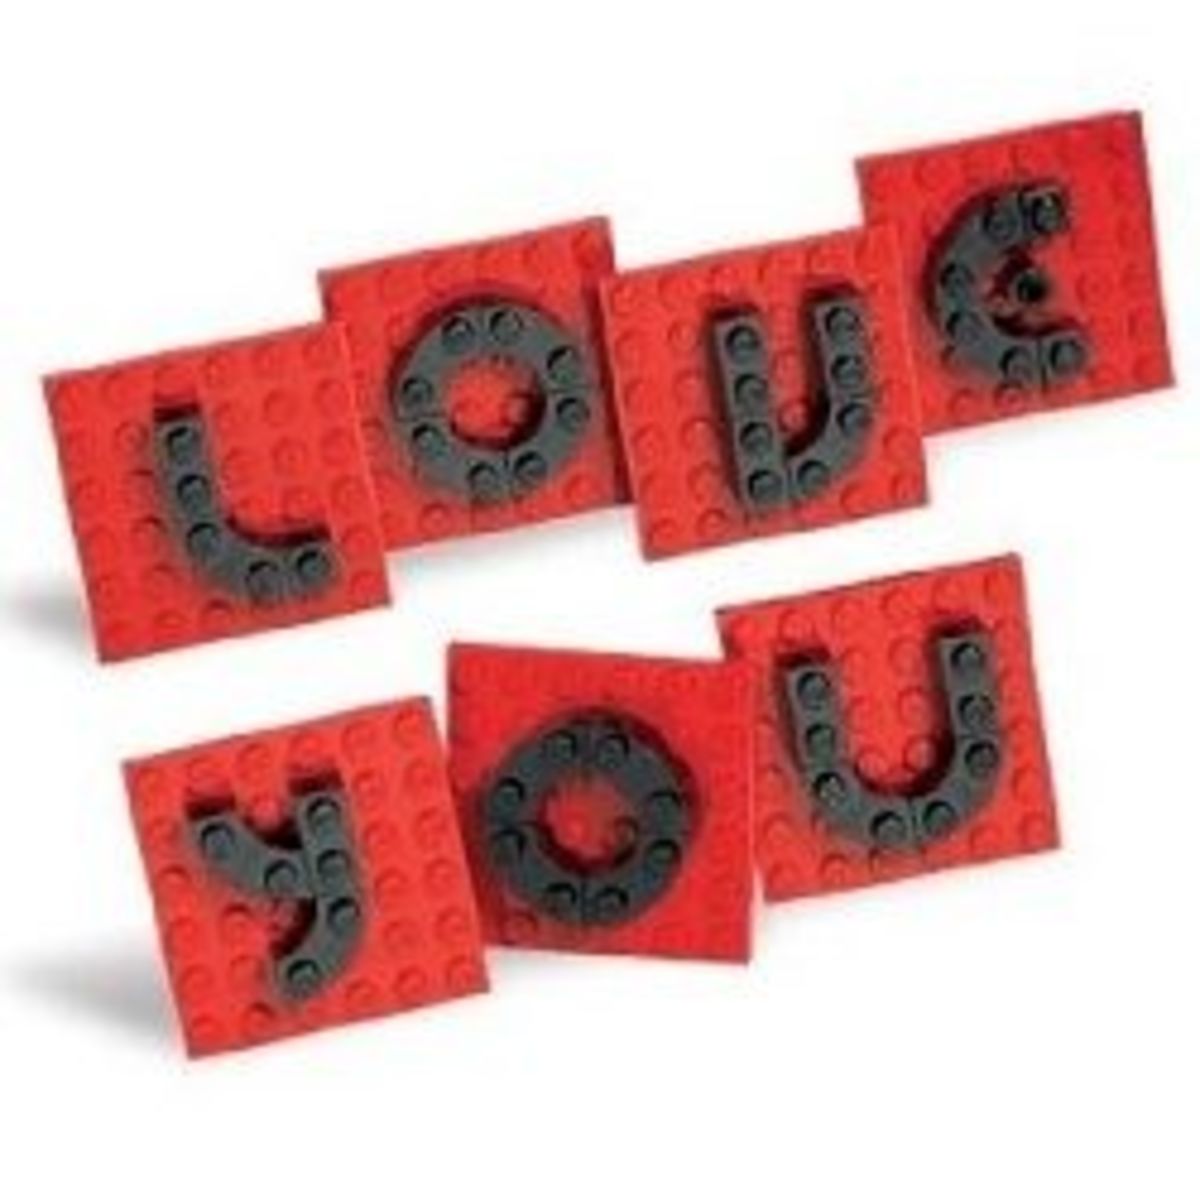 Valentine's Day gifts for LEGO fans 2013